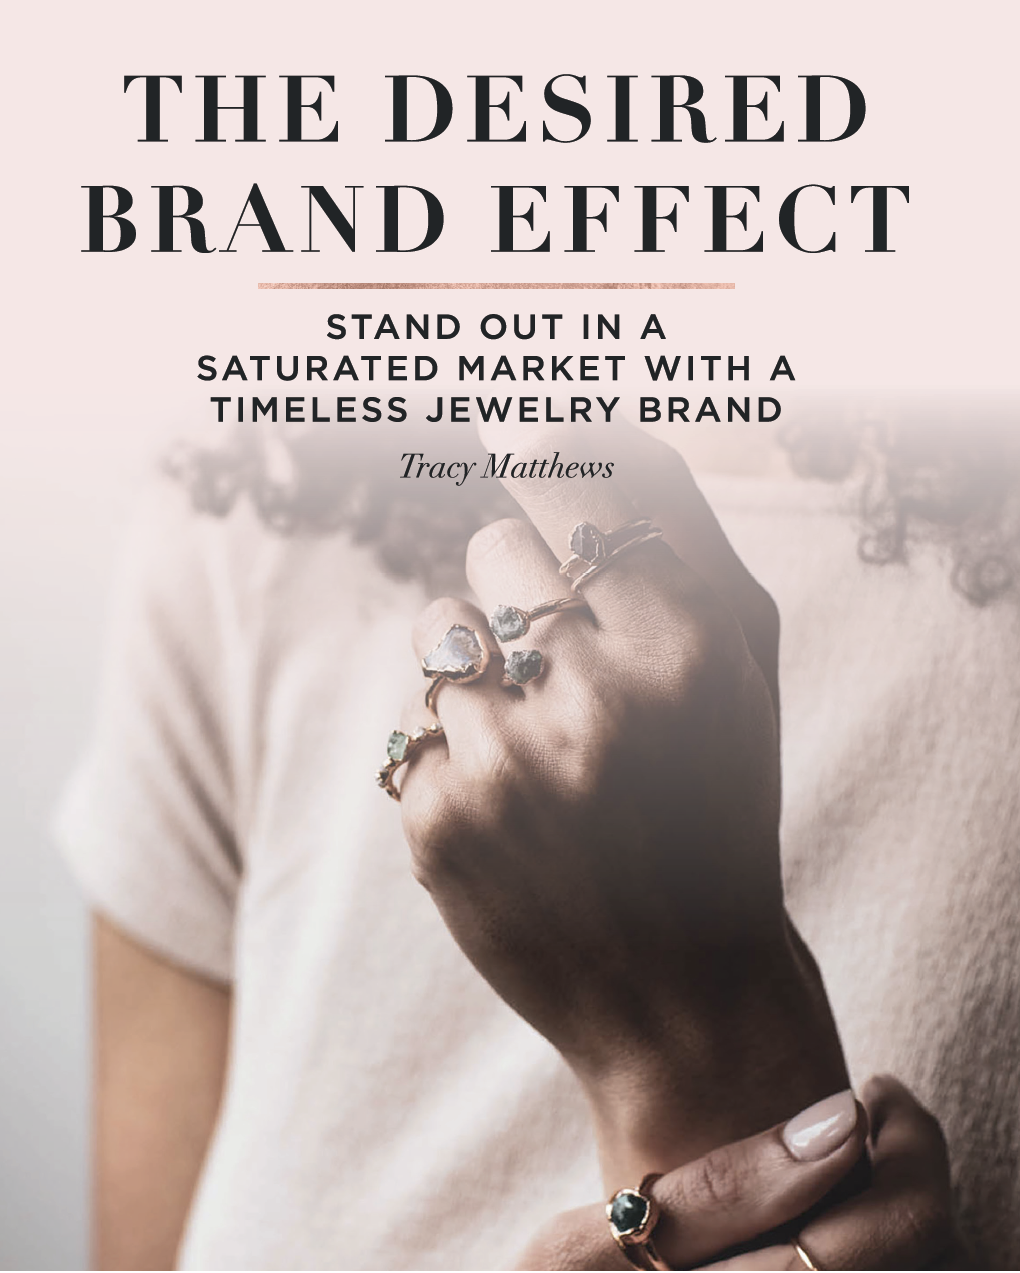 The Desired Brand Effect: Tracy Matthews has a book for you.